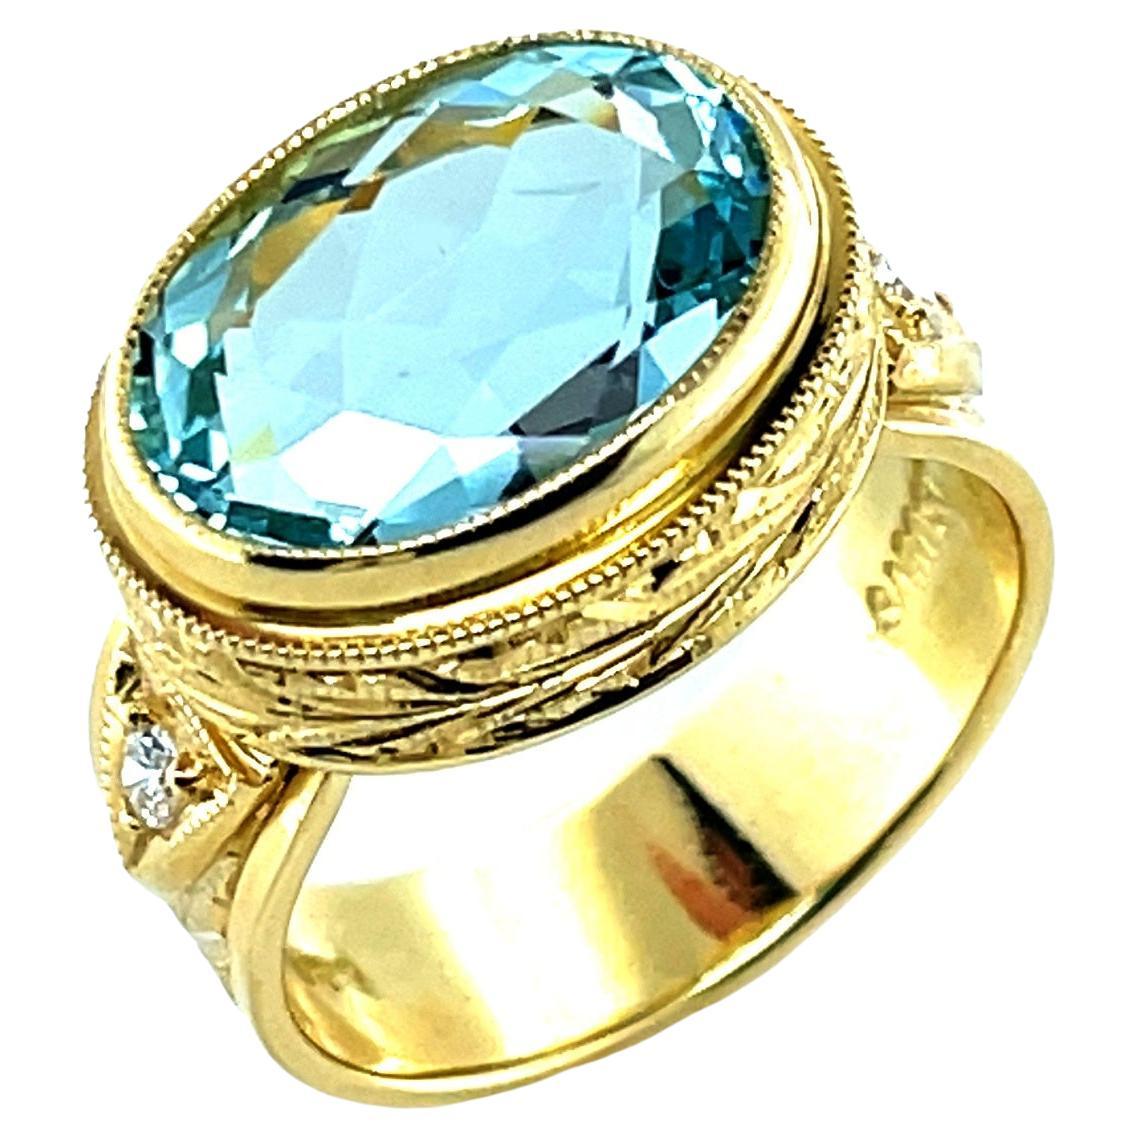 6.16 Carat Aquamarine in 18k Yellow Gold, Hand Engraved Ring with Diamonds For Sale